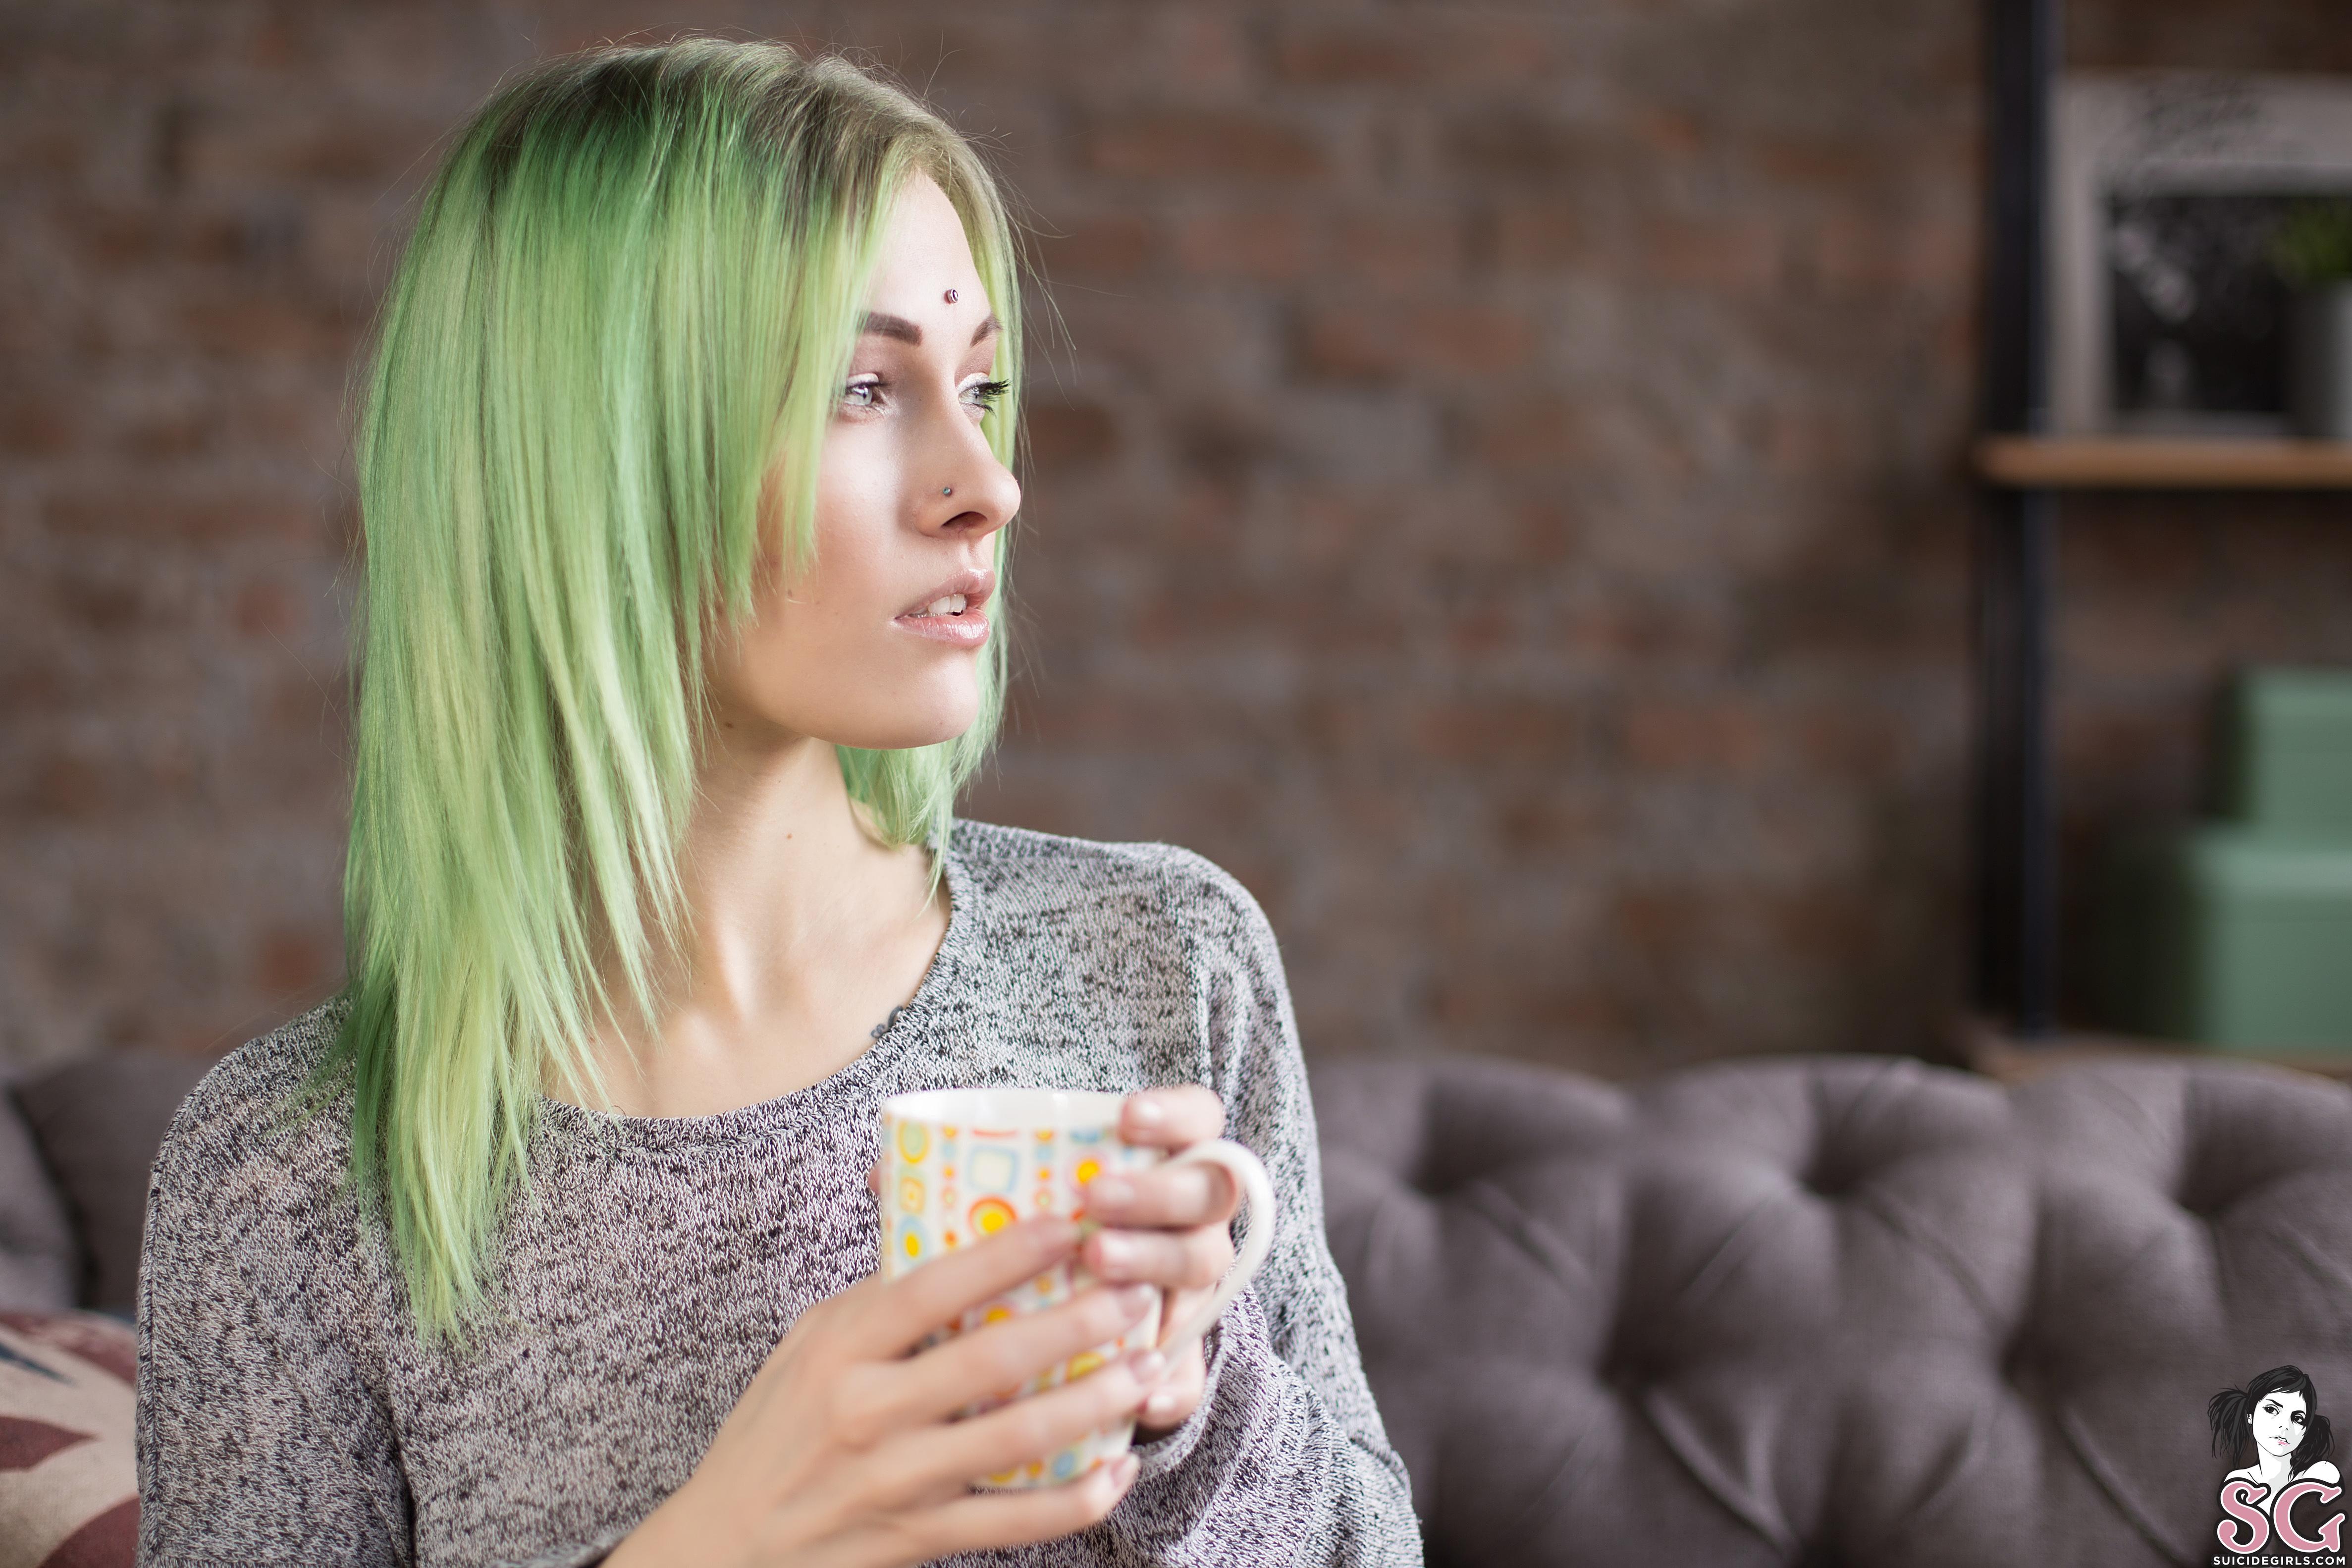 Women Model Dyed Hair Green Hair Sweater Couch Cup Looking Away Depth Of Field Pierced Women Indoors 4748x3165